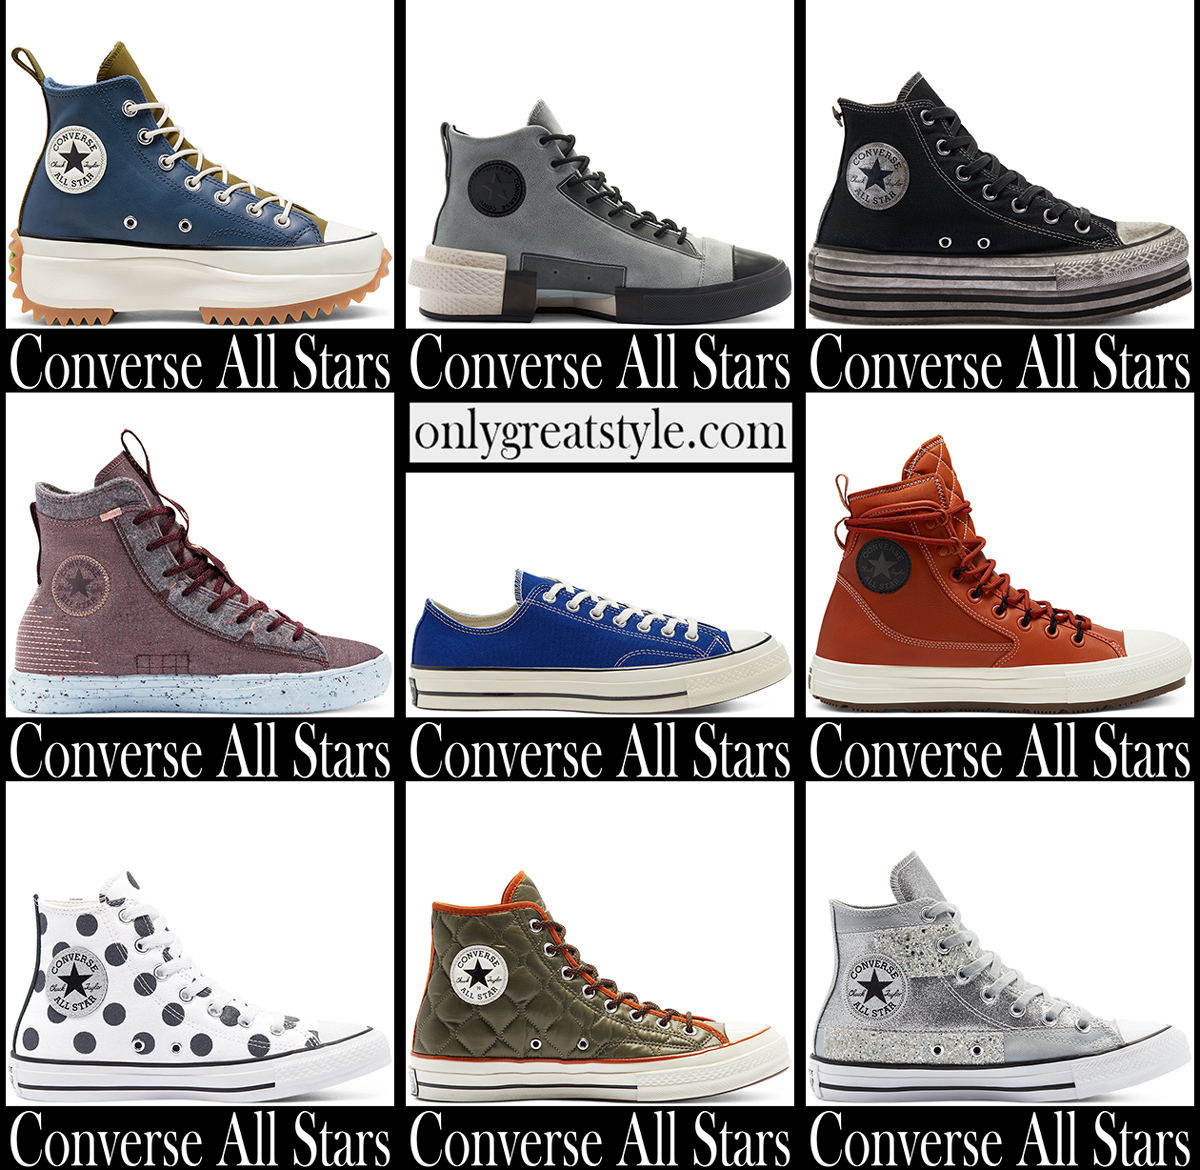 Converse sneakers 2021 new arrivals 